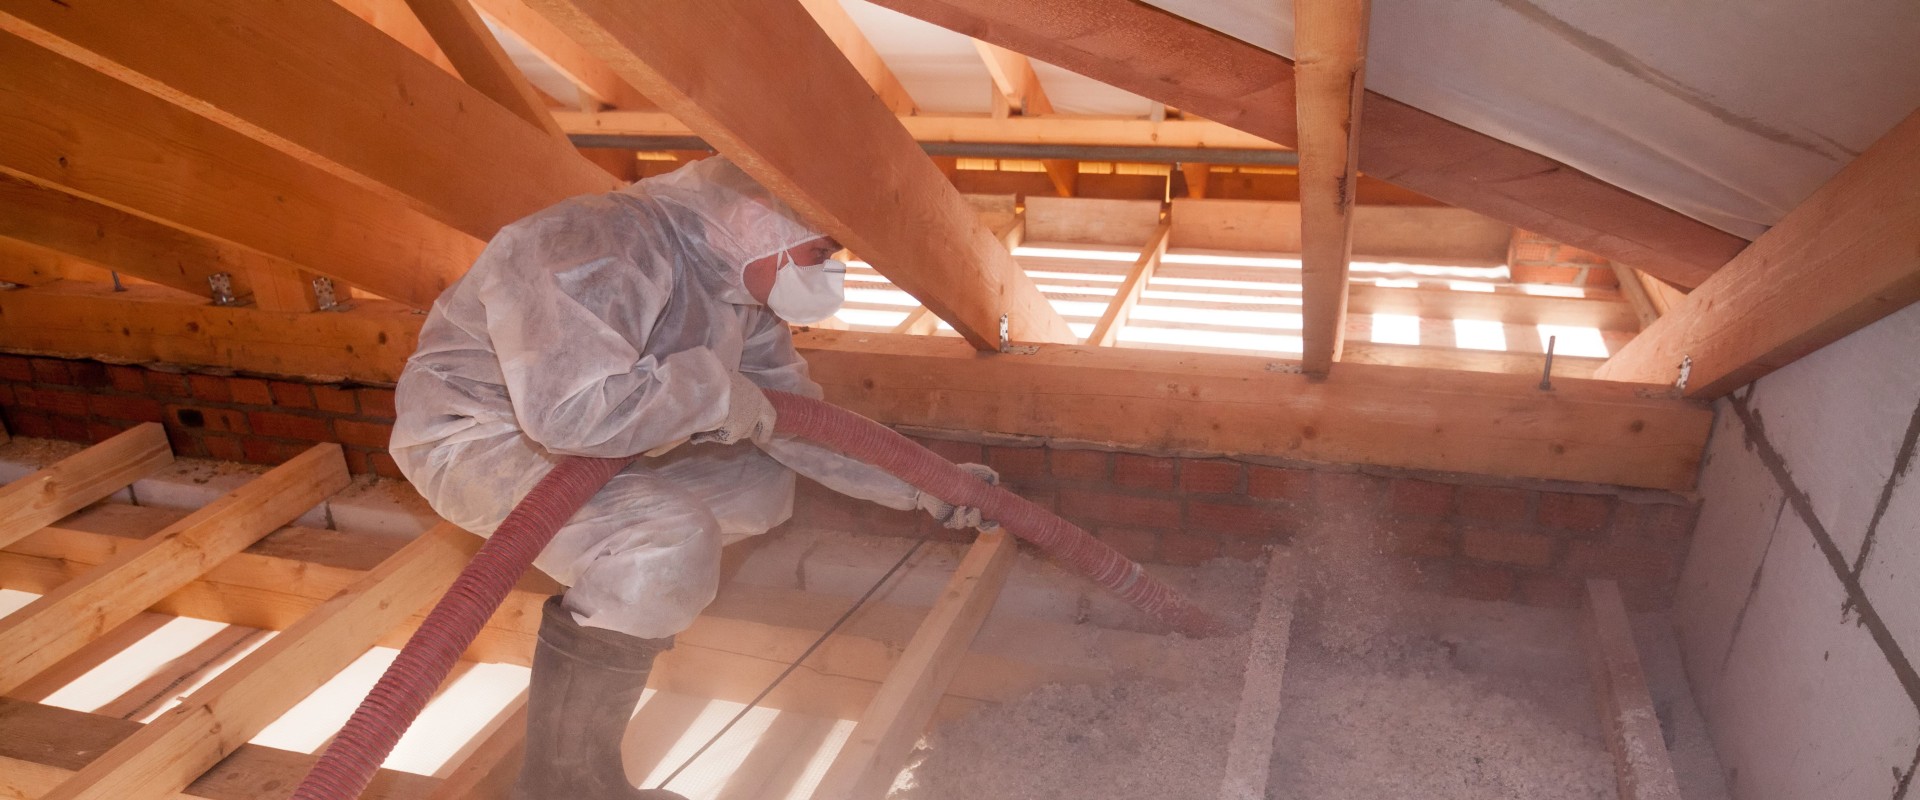 Insulating Historic Homes in Boca Raton, FL: Special Considerations and Discounts